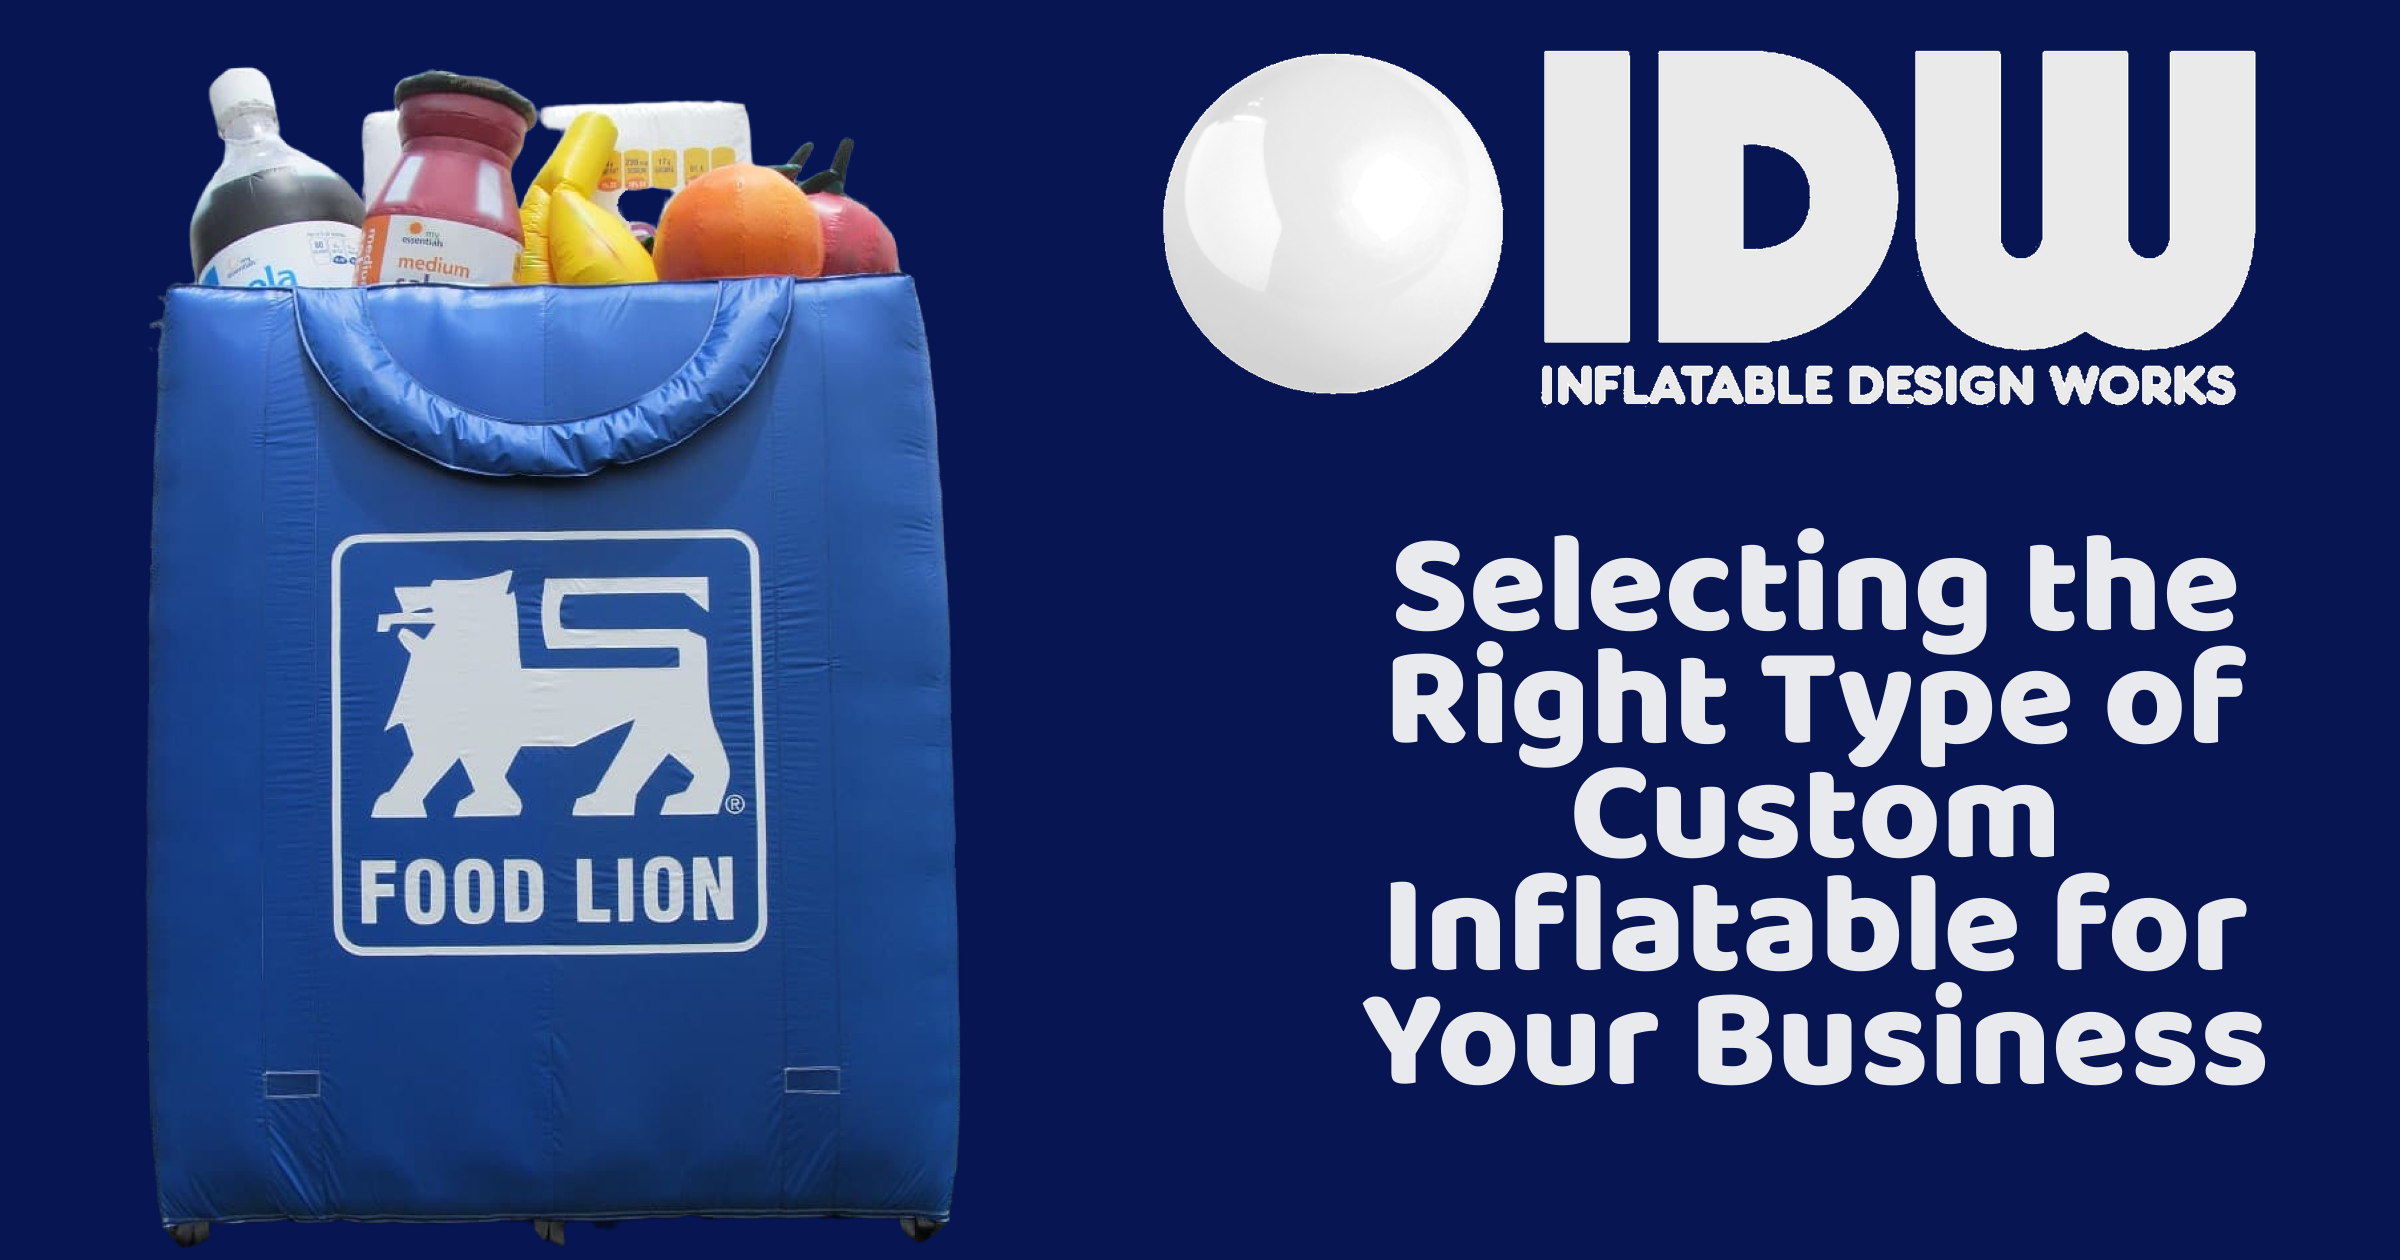 Selecting the Right Type of Custom Inflatable for Your Business